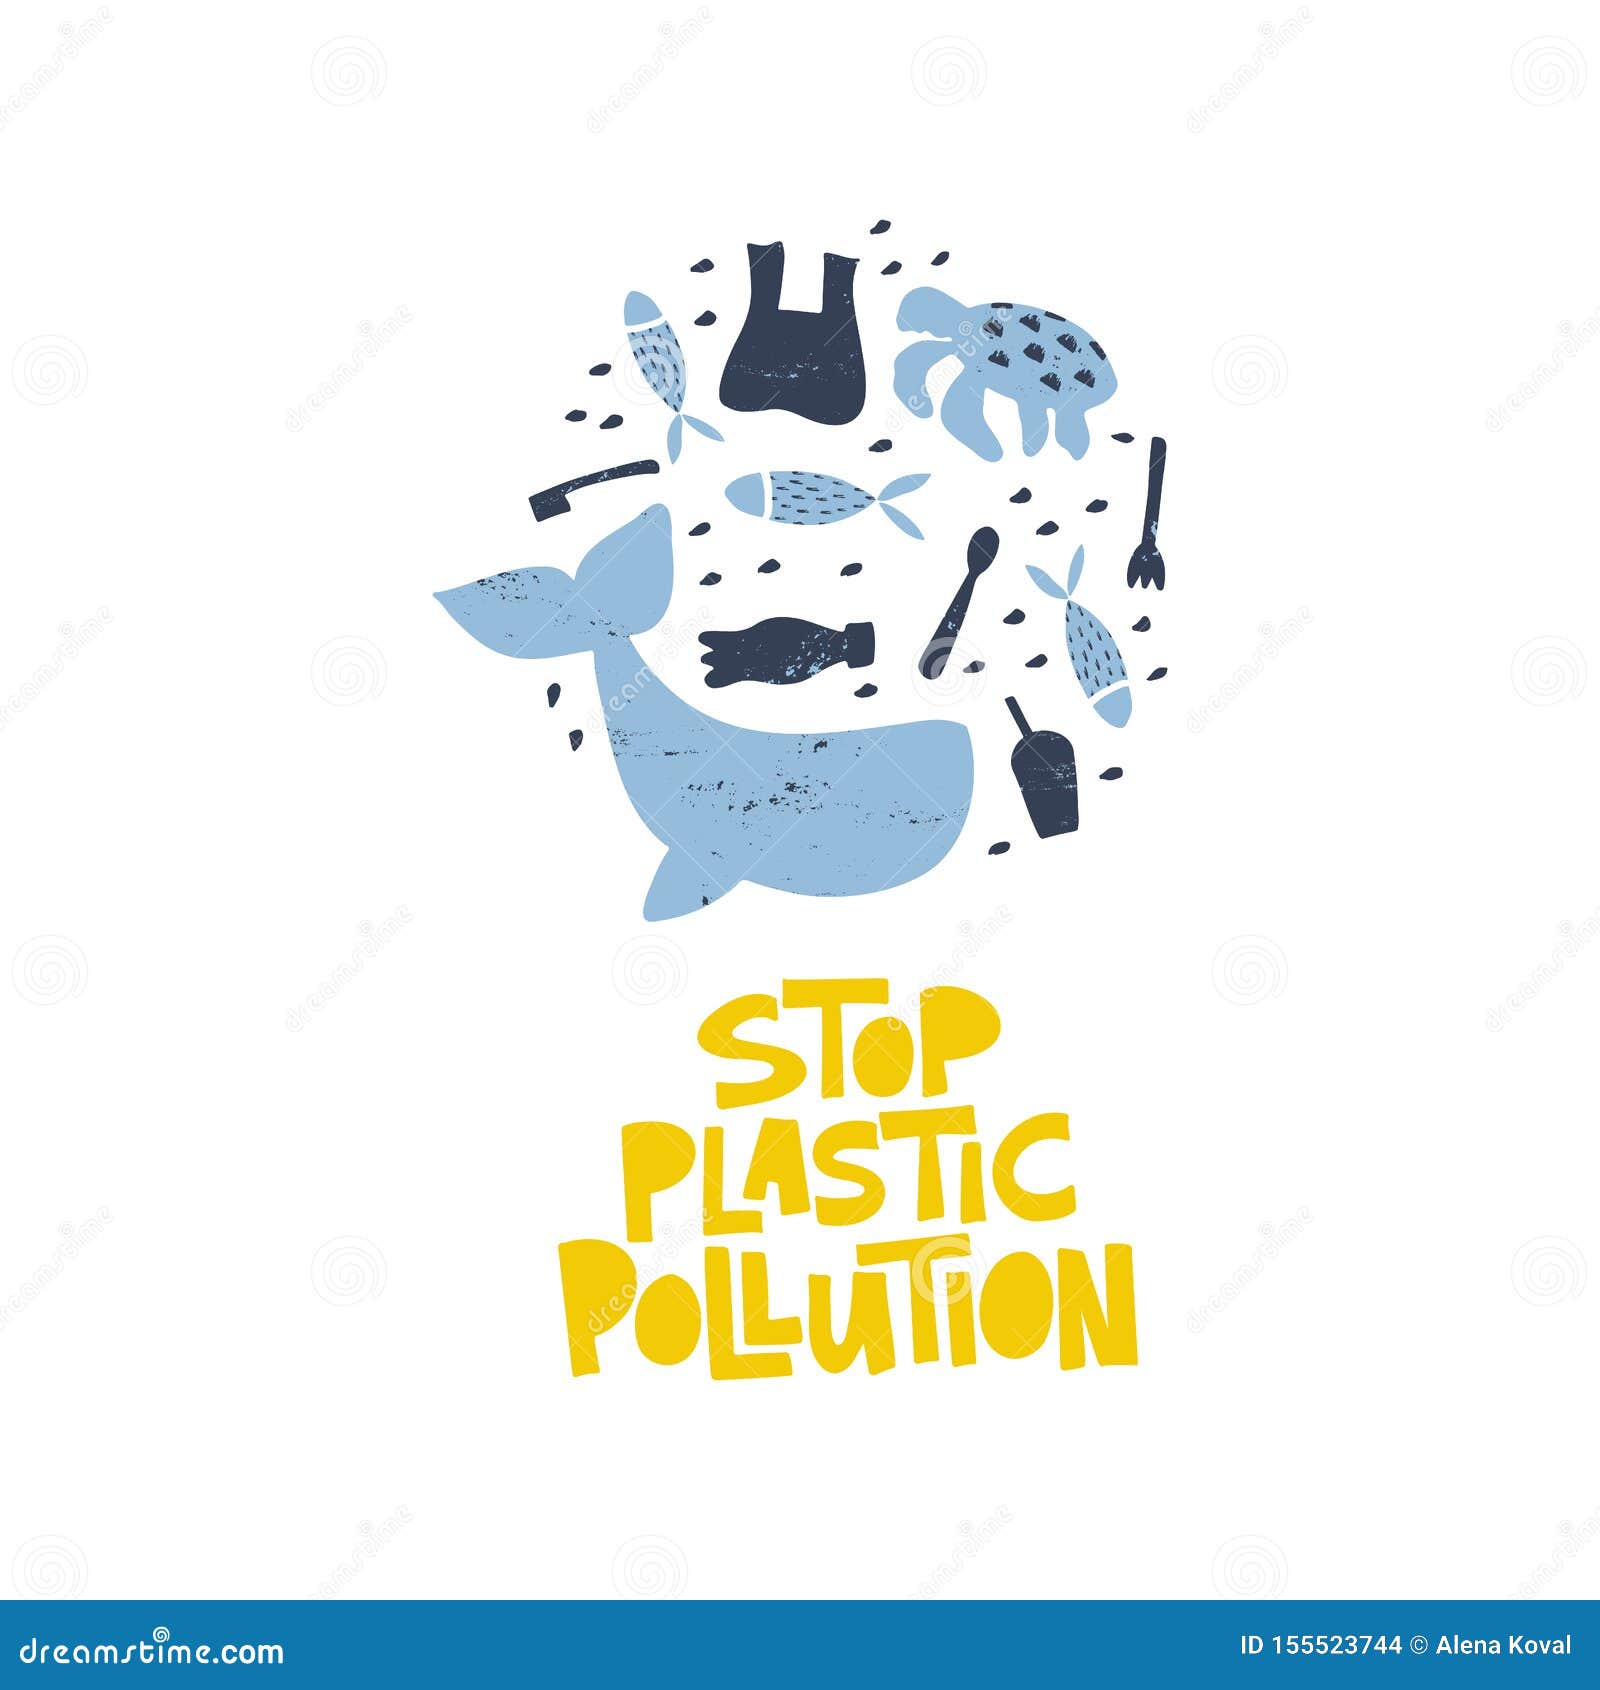 How to draw stop plastic pollution drawing || poster chart project making  ideas - ban plastic - YouTube